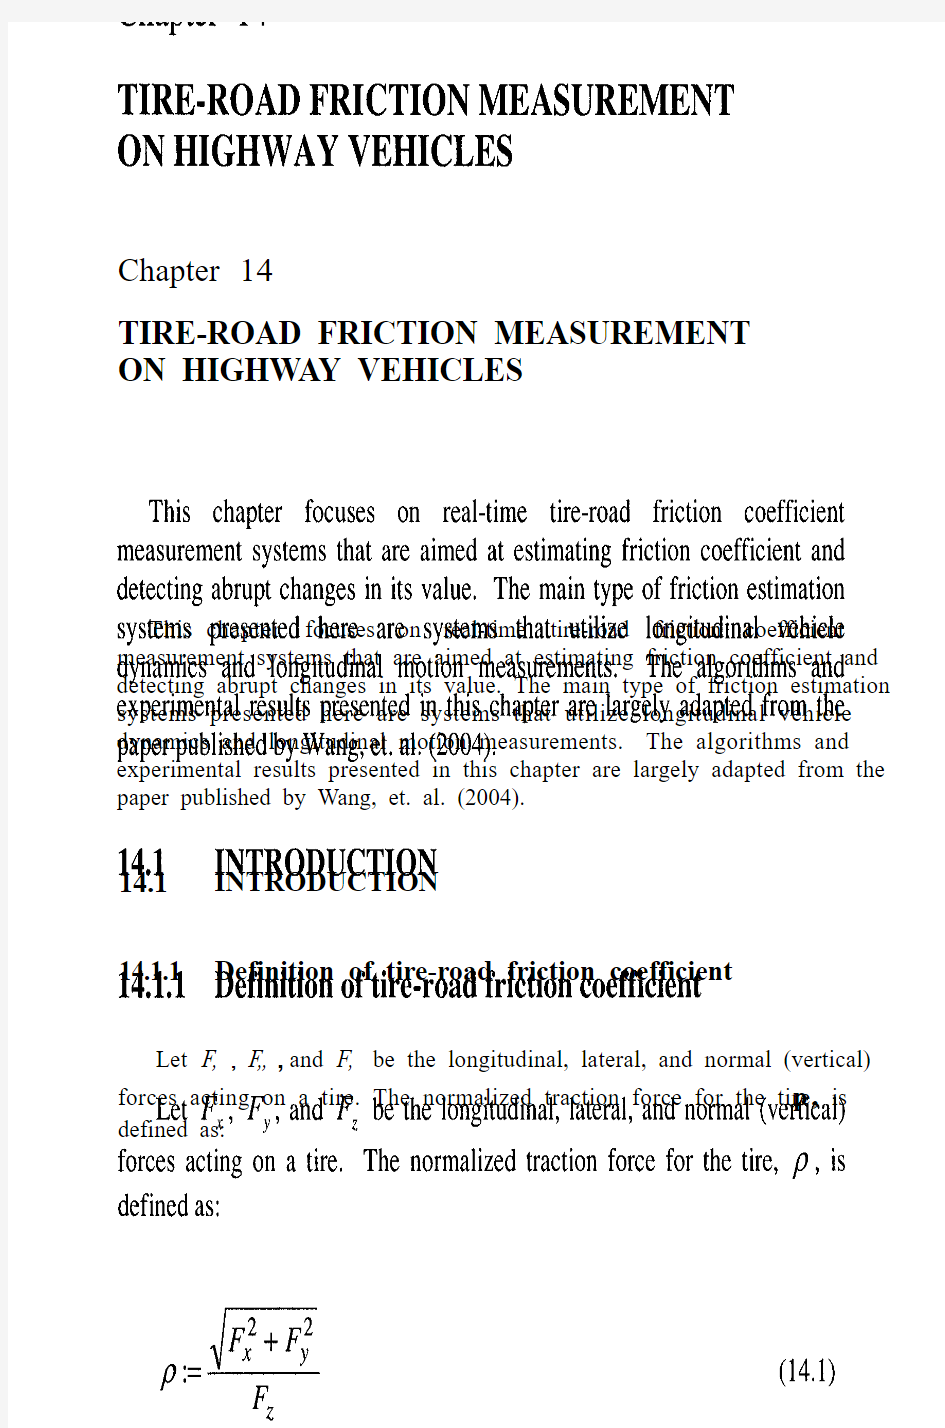 Chapter14 Tire-Road Friction Measurement on Highway Vehicles(33)